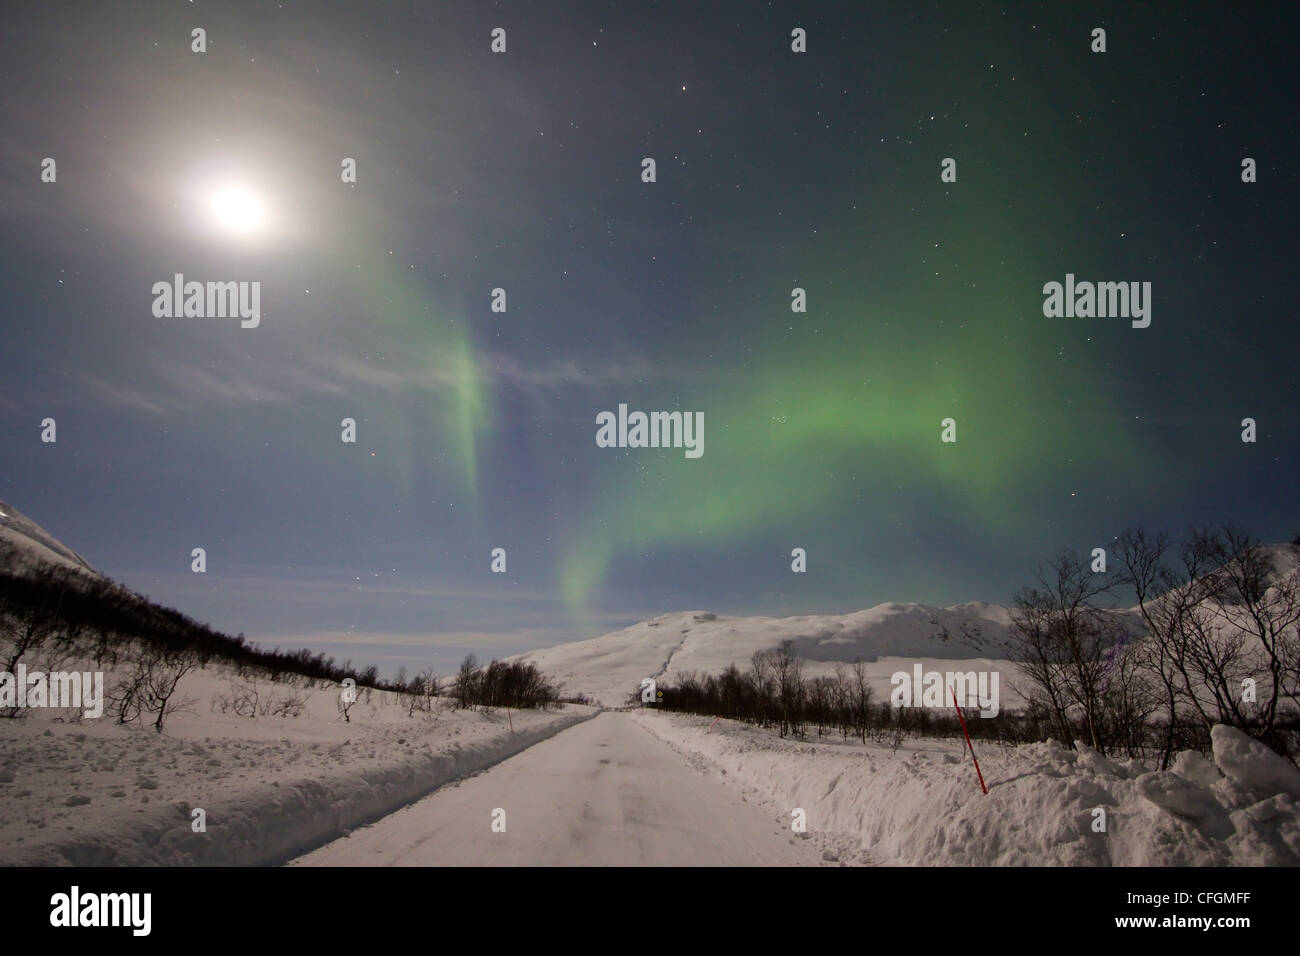 Aurora borealis or northern lights moving across night sky within the Arctic Circle Tromso Troms  region norway 2012 Stock Photo